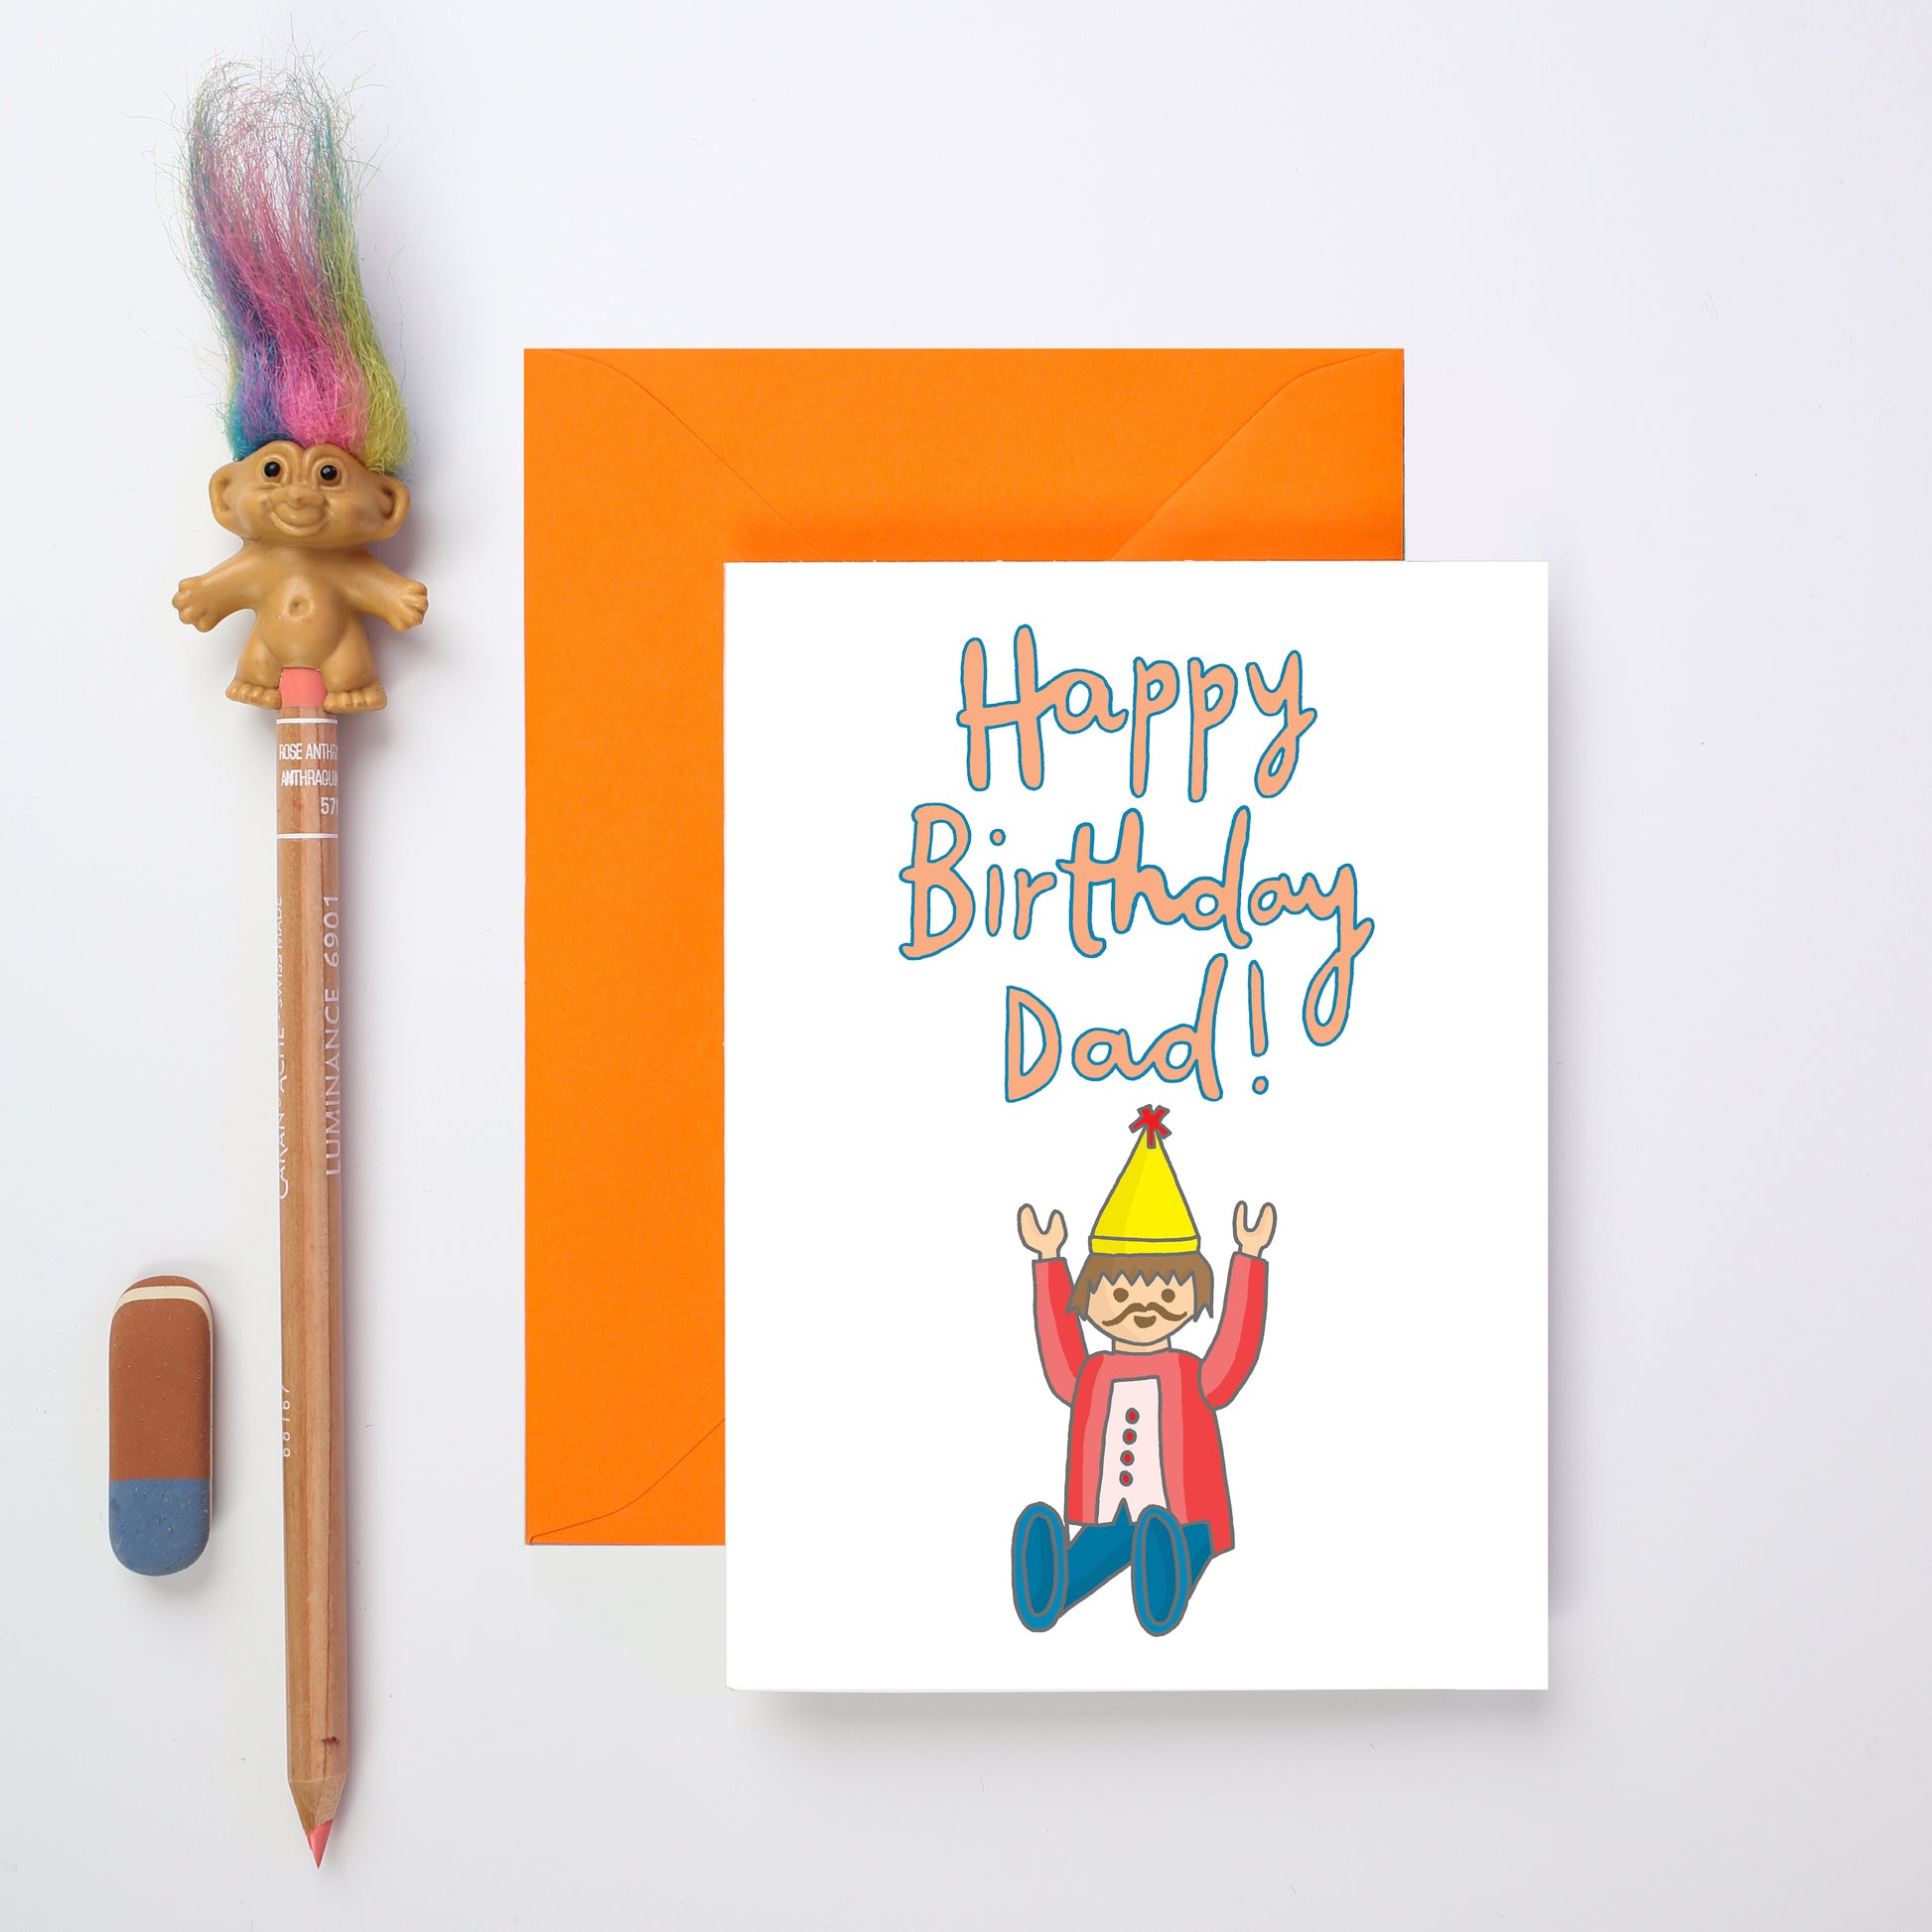 A Retro Dad Birthday Card from You've Got Pen on Your Face.